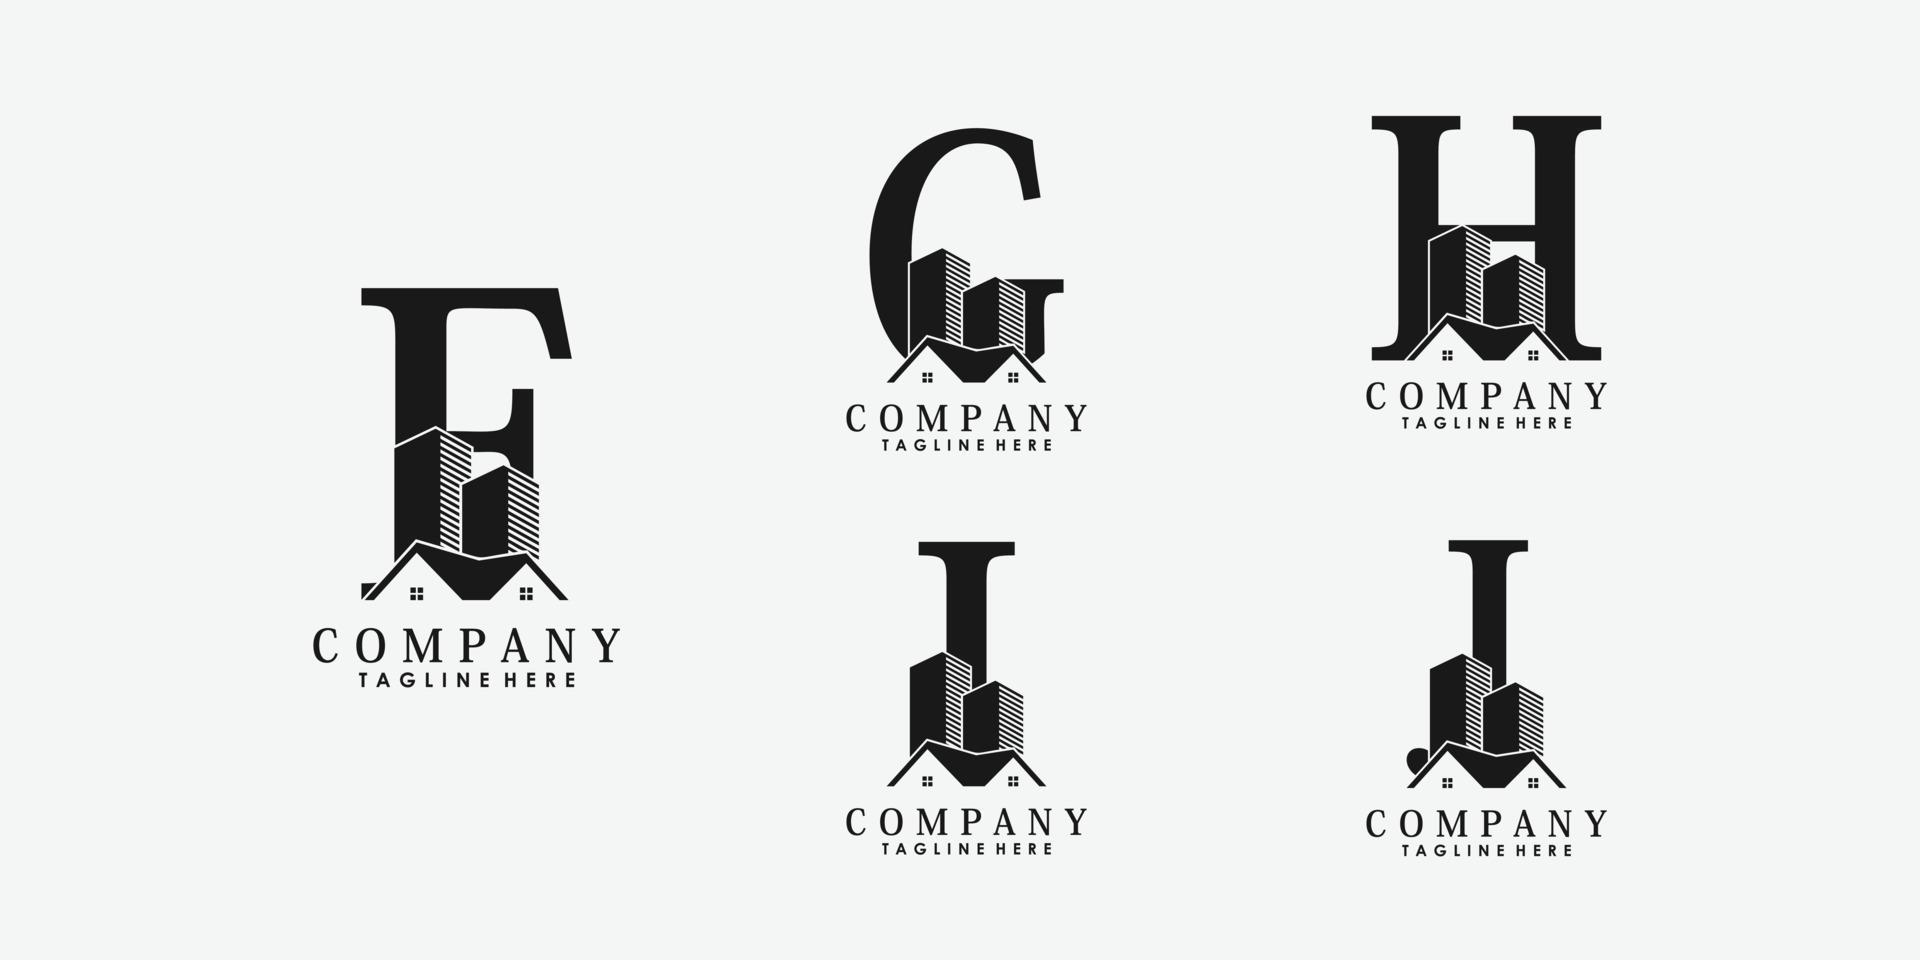 set of letter font fghij logo design vector with real estate and building icon